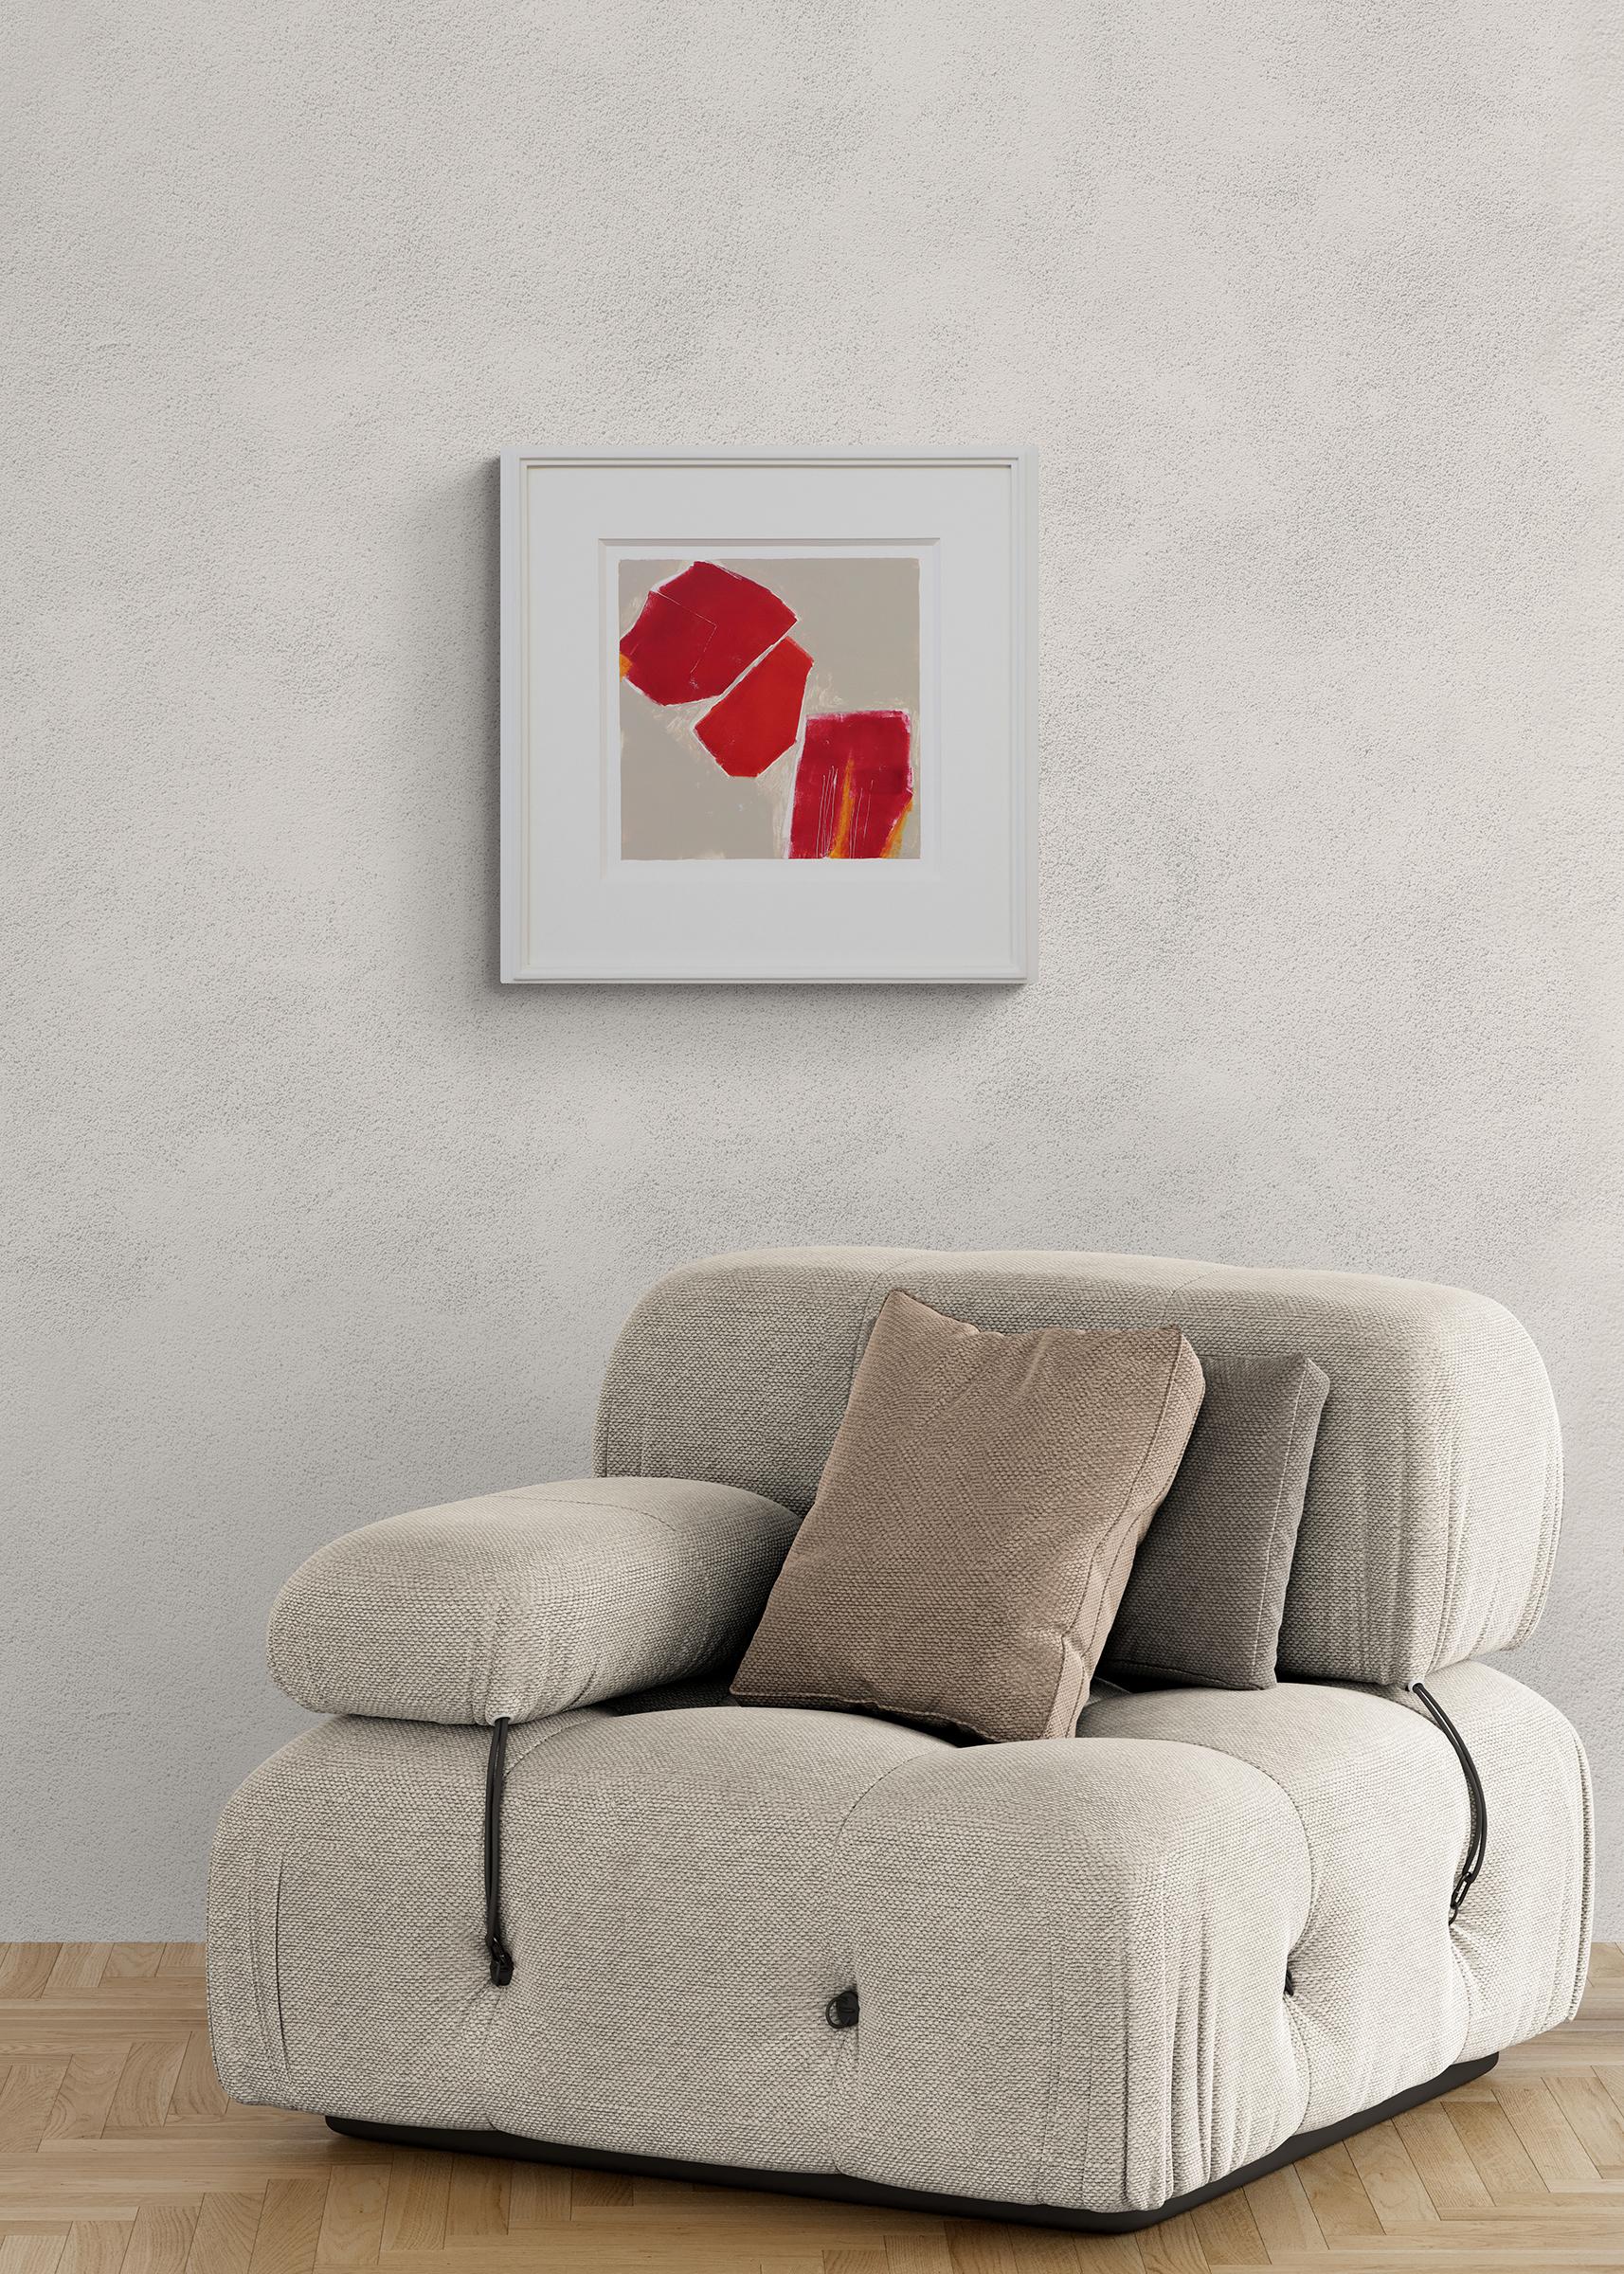 Monotype, ink on paper, featuring an abstract red and beige composition by Wilma Fiori (1929-2019). Presented in a custom frame with all archival materials measuring 20 x 19 1⁄2 x 1 inches. Original image is 10 3⁄4 x 10 3⁄4 inches.

Print is in good